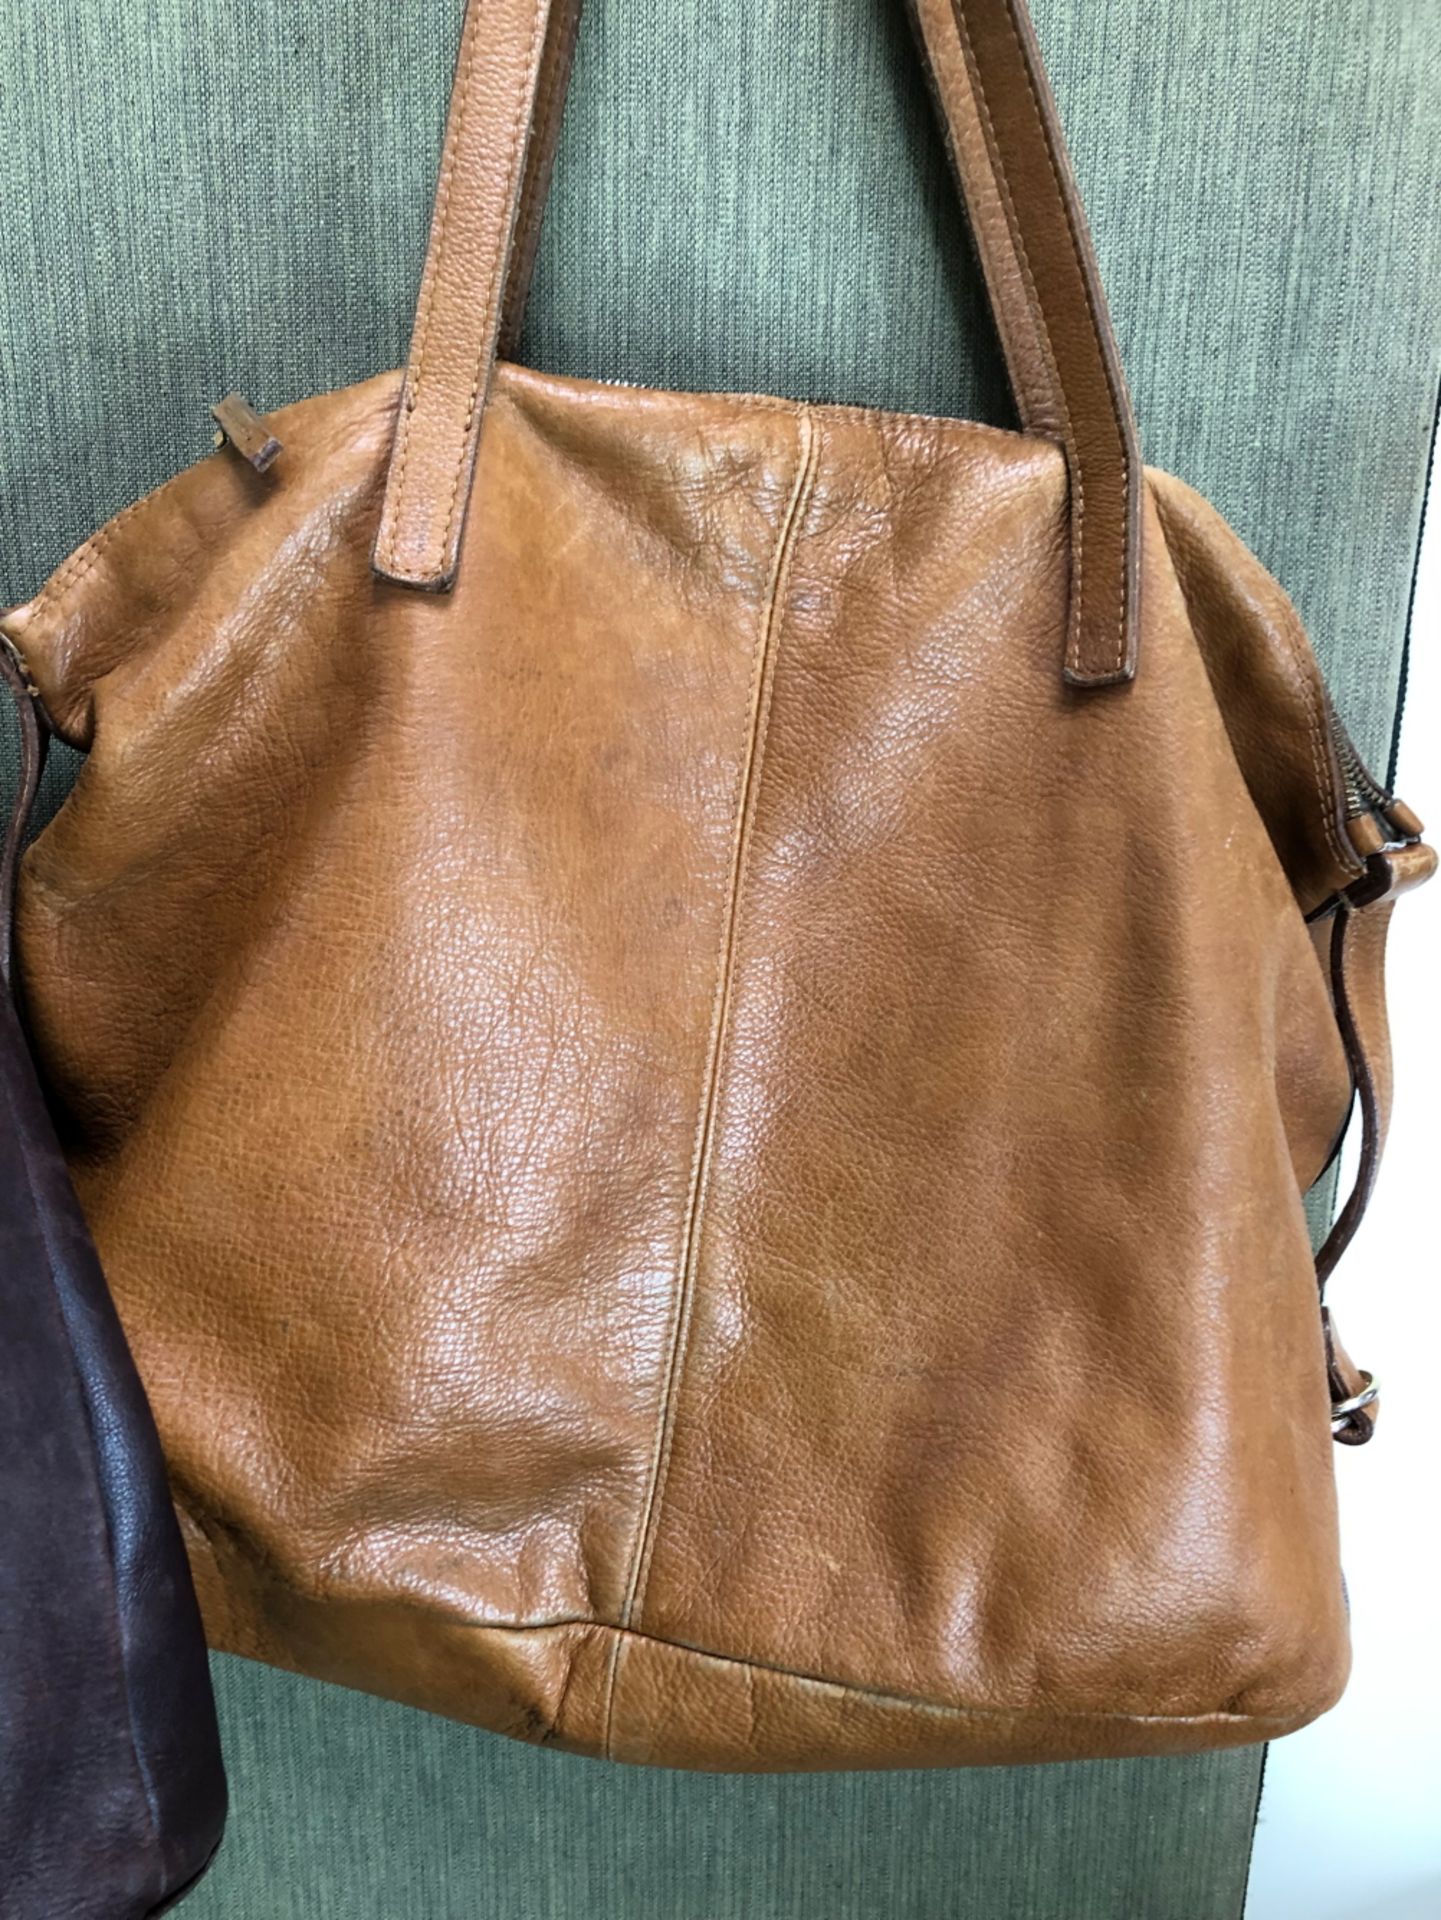 A ZARA WOMAN LARGE BROWN HANDBAG W 45cm, TOGETHER WITH A DARK BROWN LEATHER PAUL COSTELLOE BAG, A - Image 11 of 11